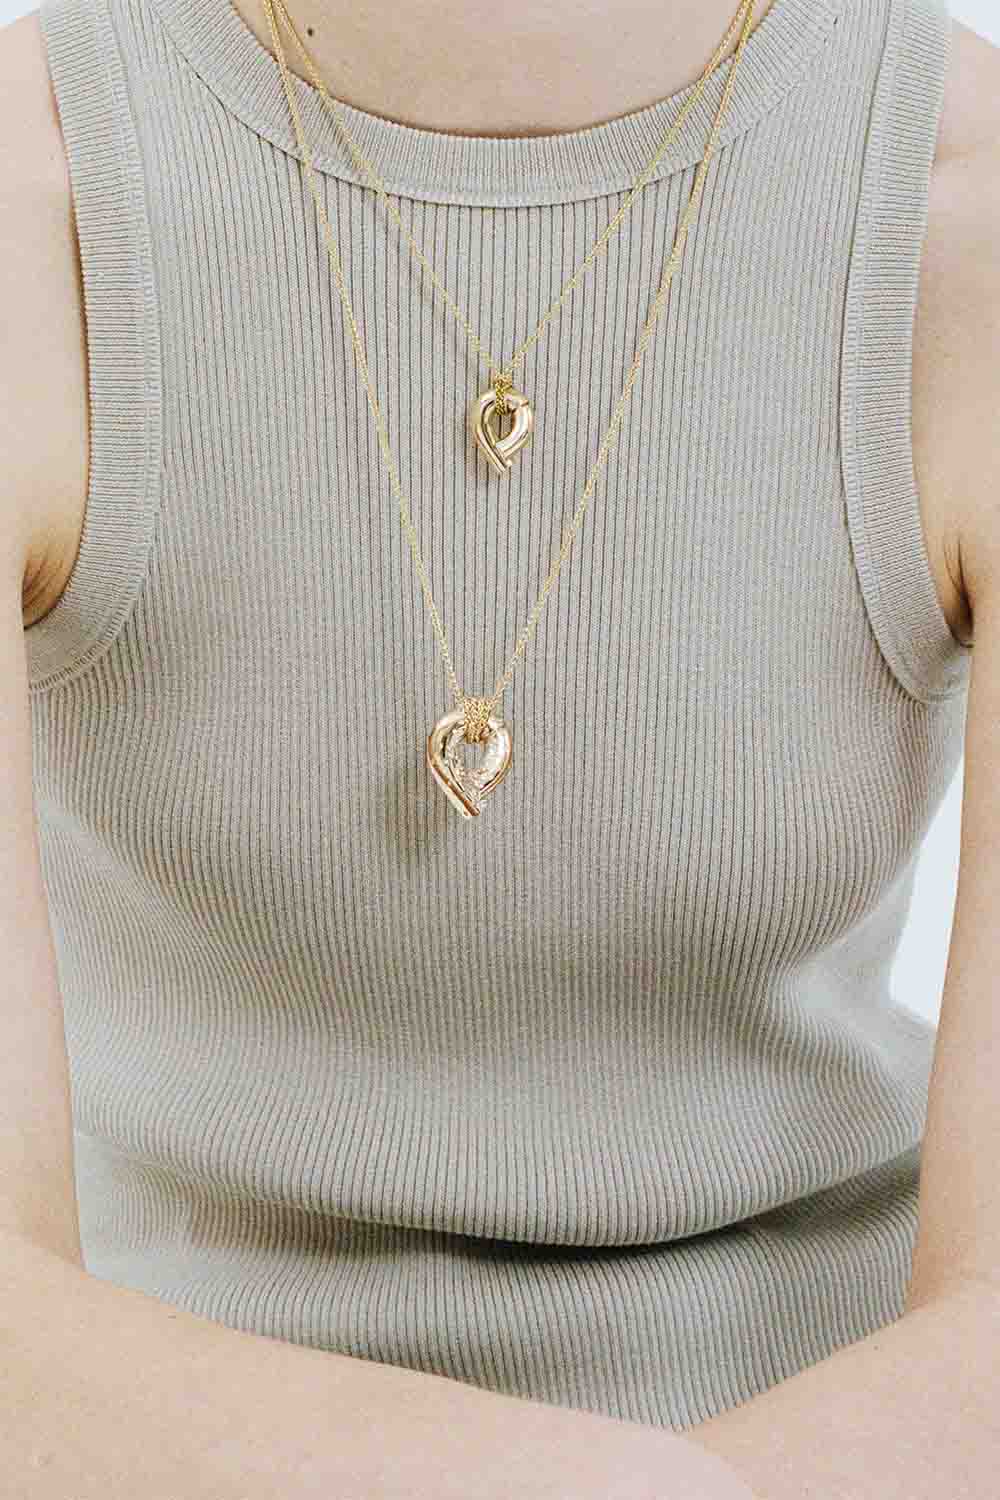 TABAYER-Oera Large Pendant Necklace-YELLOW GOLD